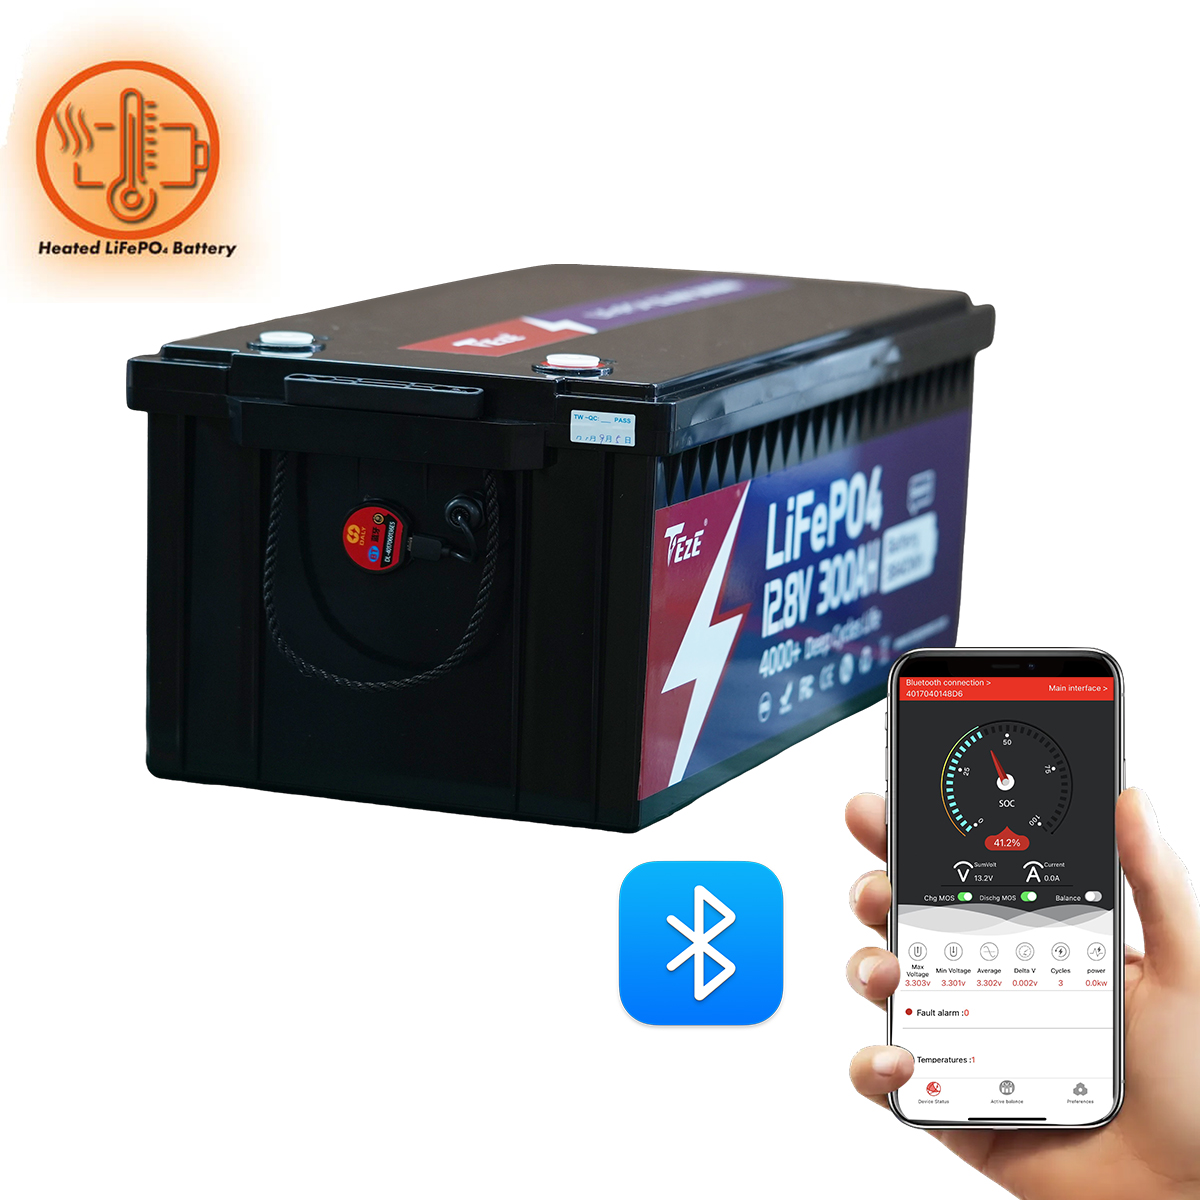 NEW-TezePower 12V300Ah LiFePO4 Battery with Bluetooth, Self-heating and Active Balancer, Built-in 200A Daly BMS (Bluetooth External Version)